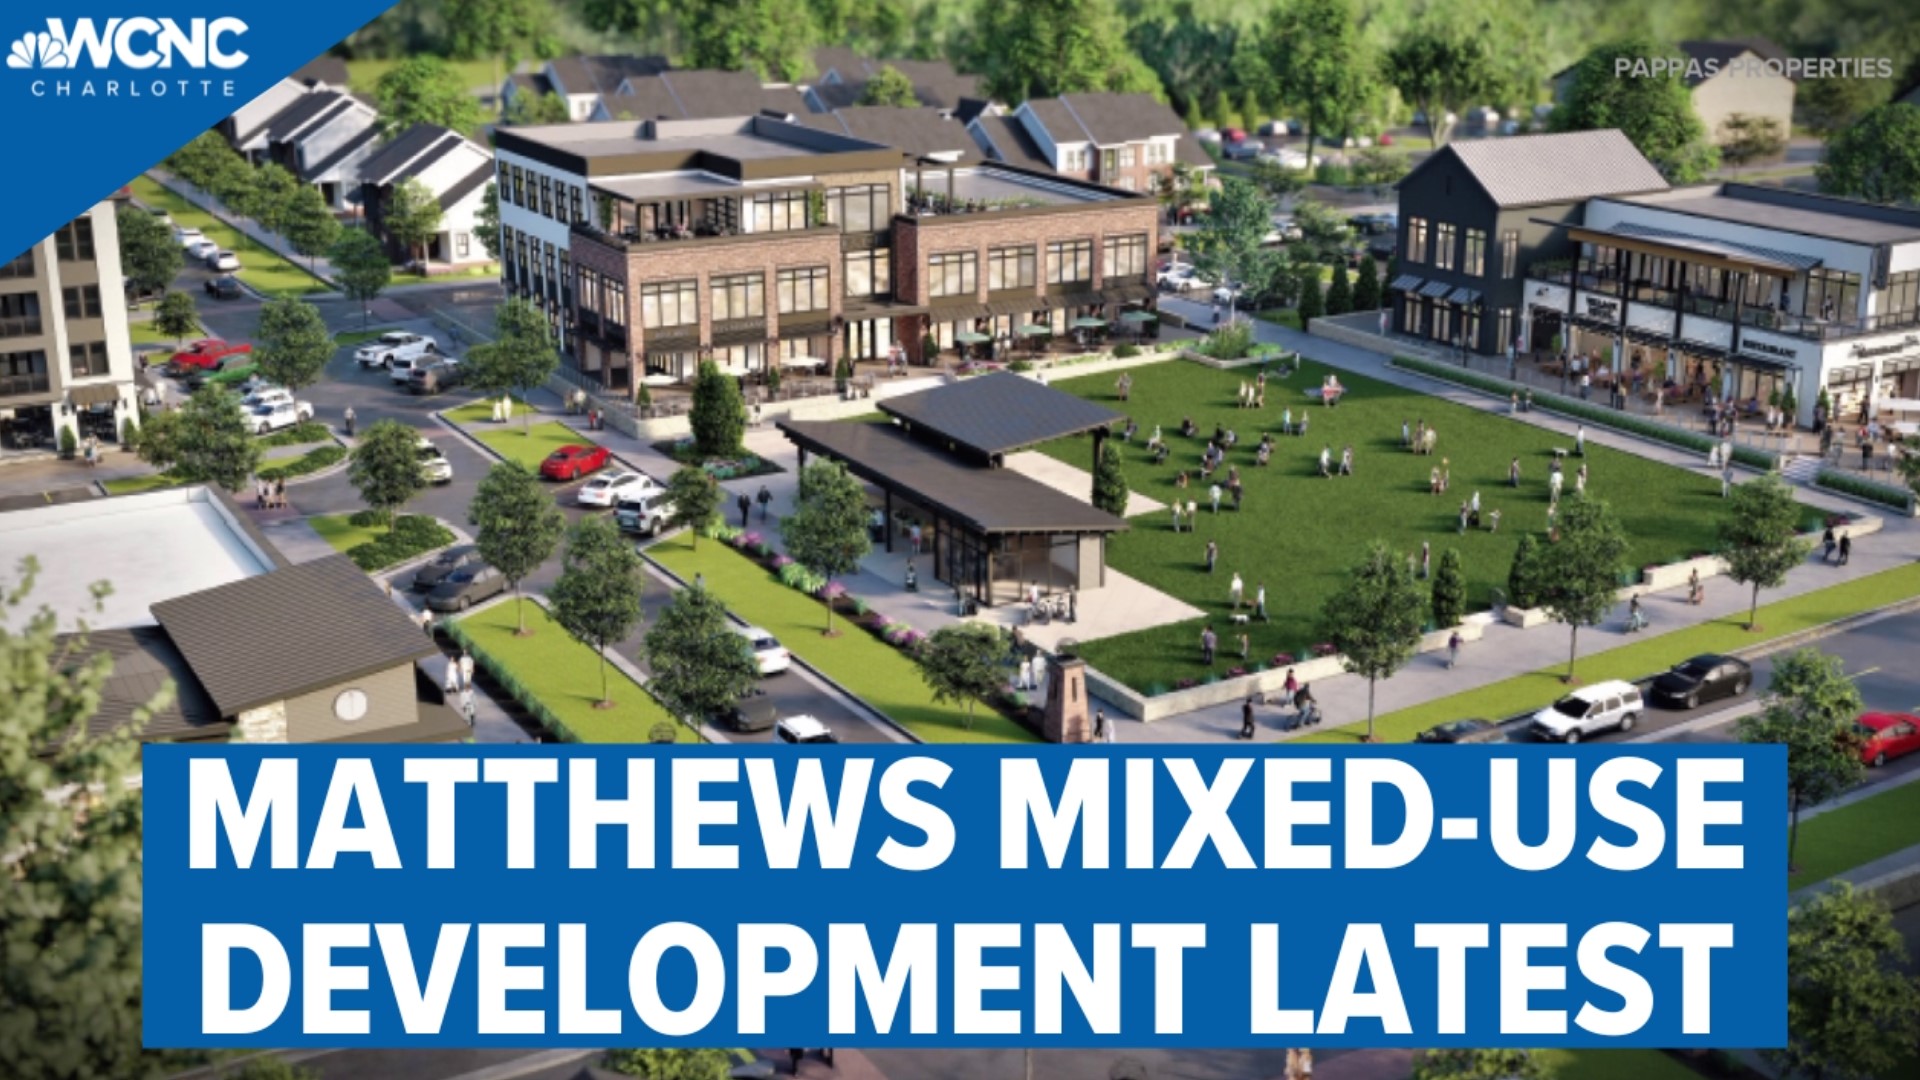 The town of Matthews is hoping to address concerns over a new development project.